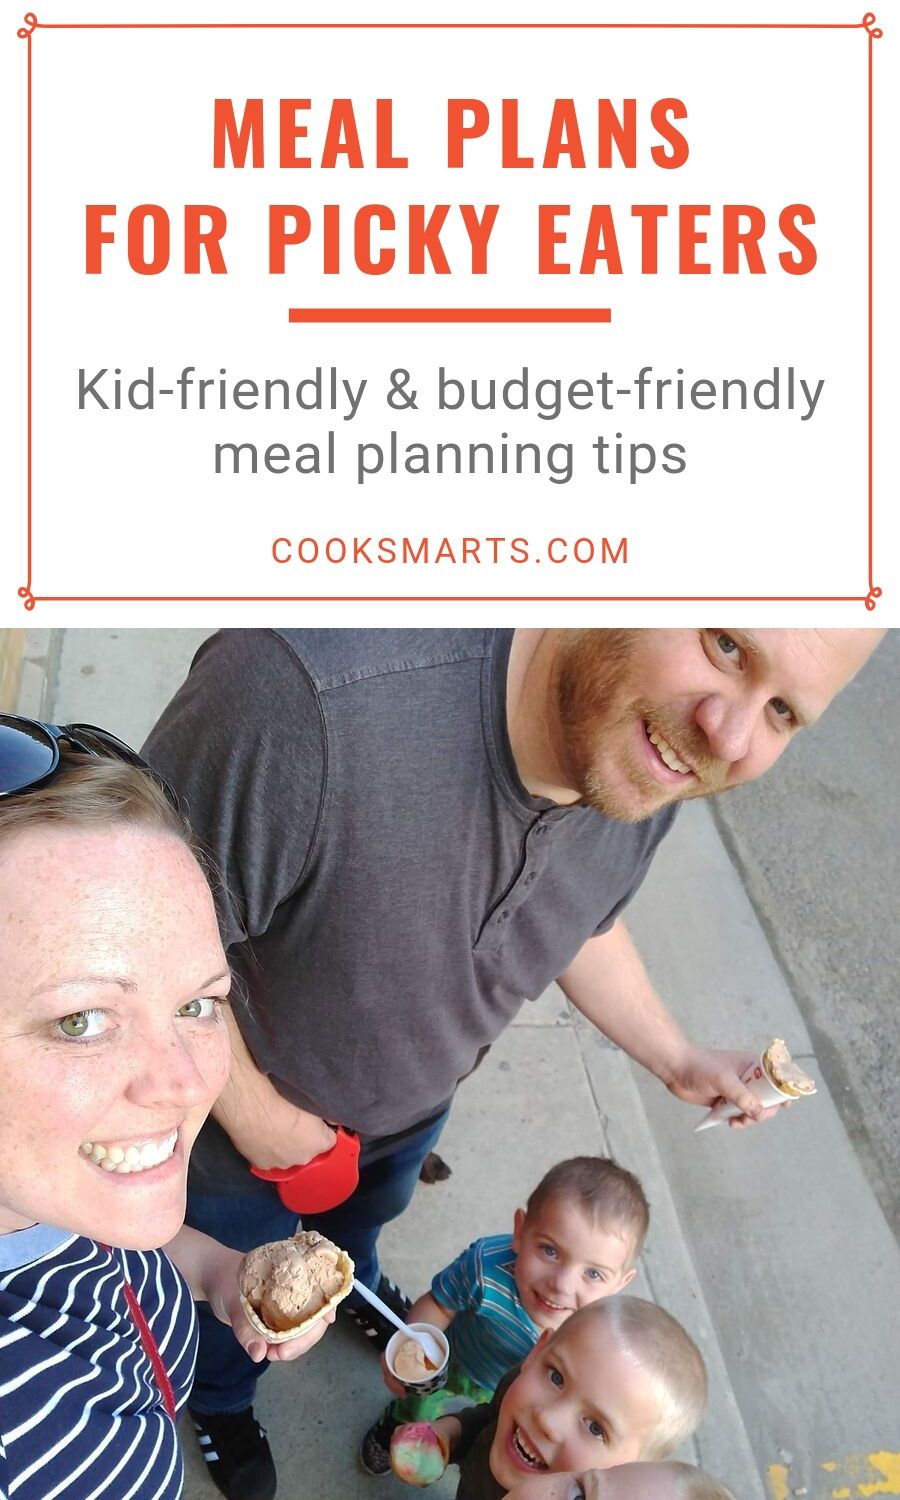 Sara: Learning to Plan the Best Family Dinners | Cook Smarts